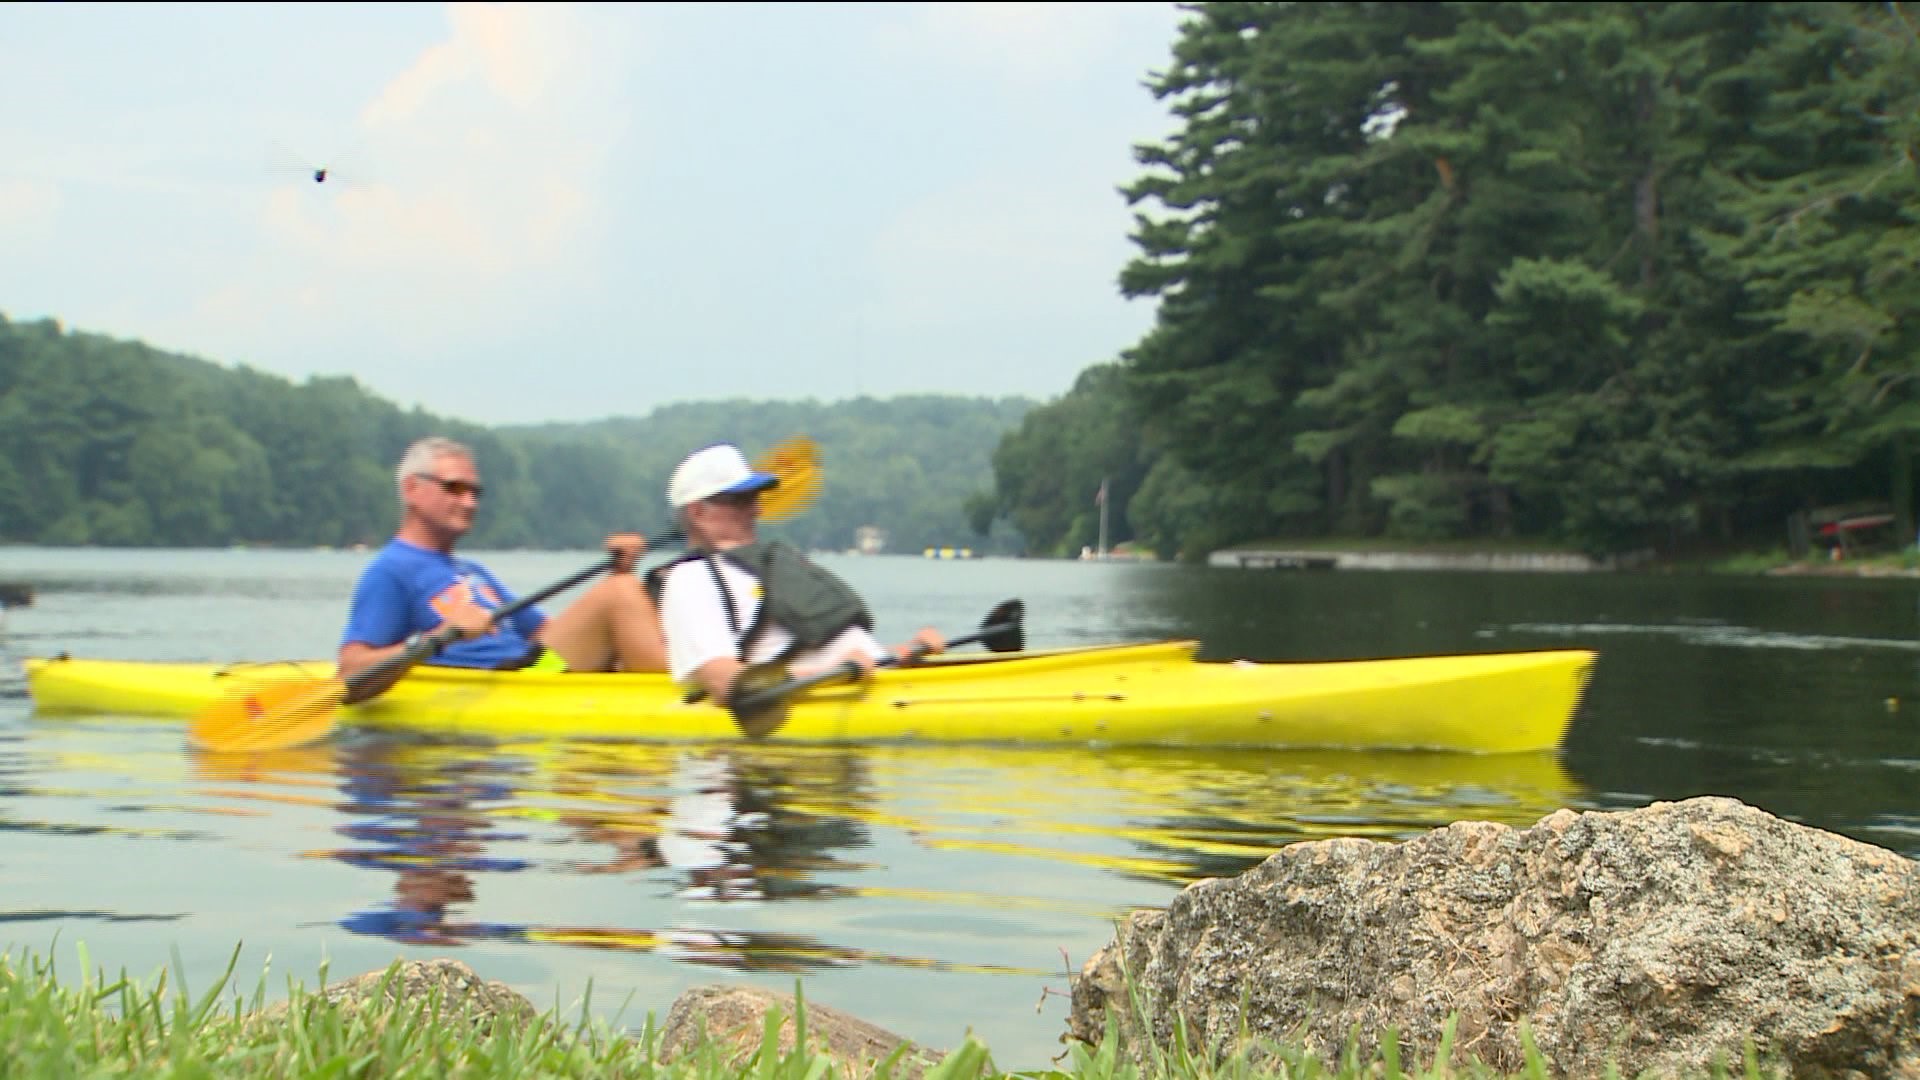 In Trumbull, the power of the paddle lifts veterans